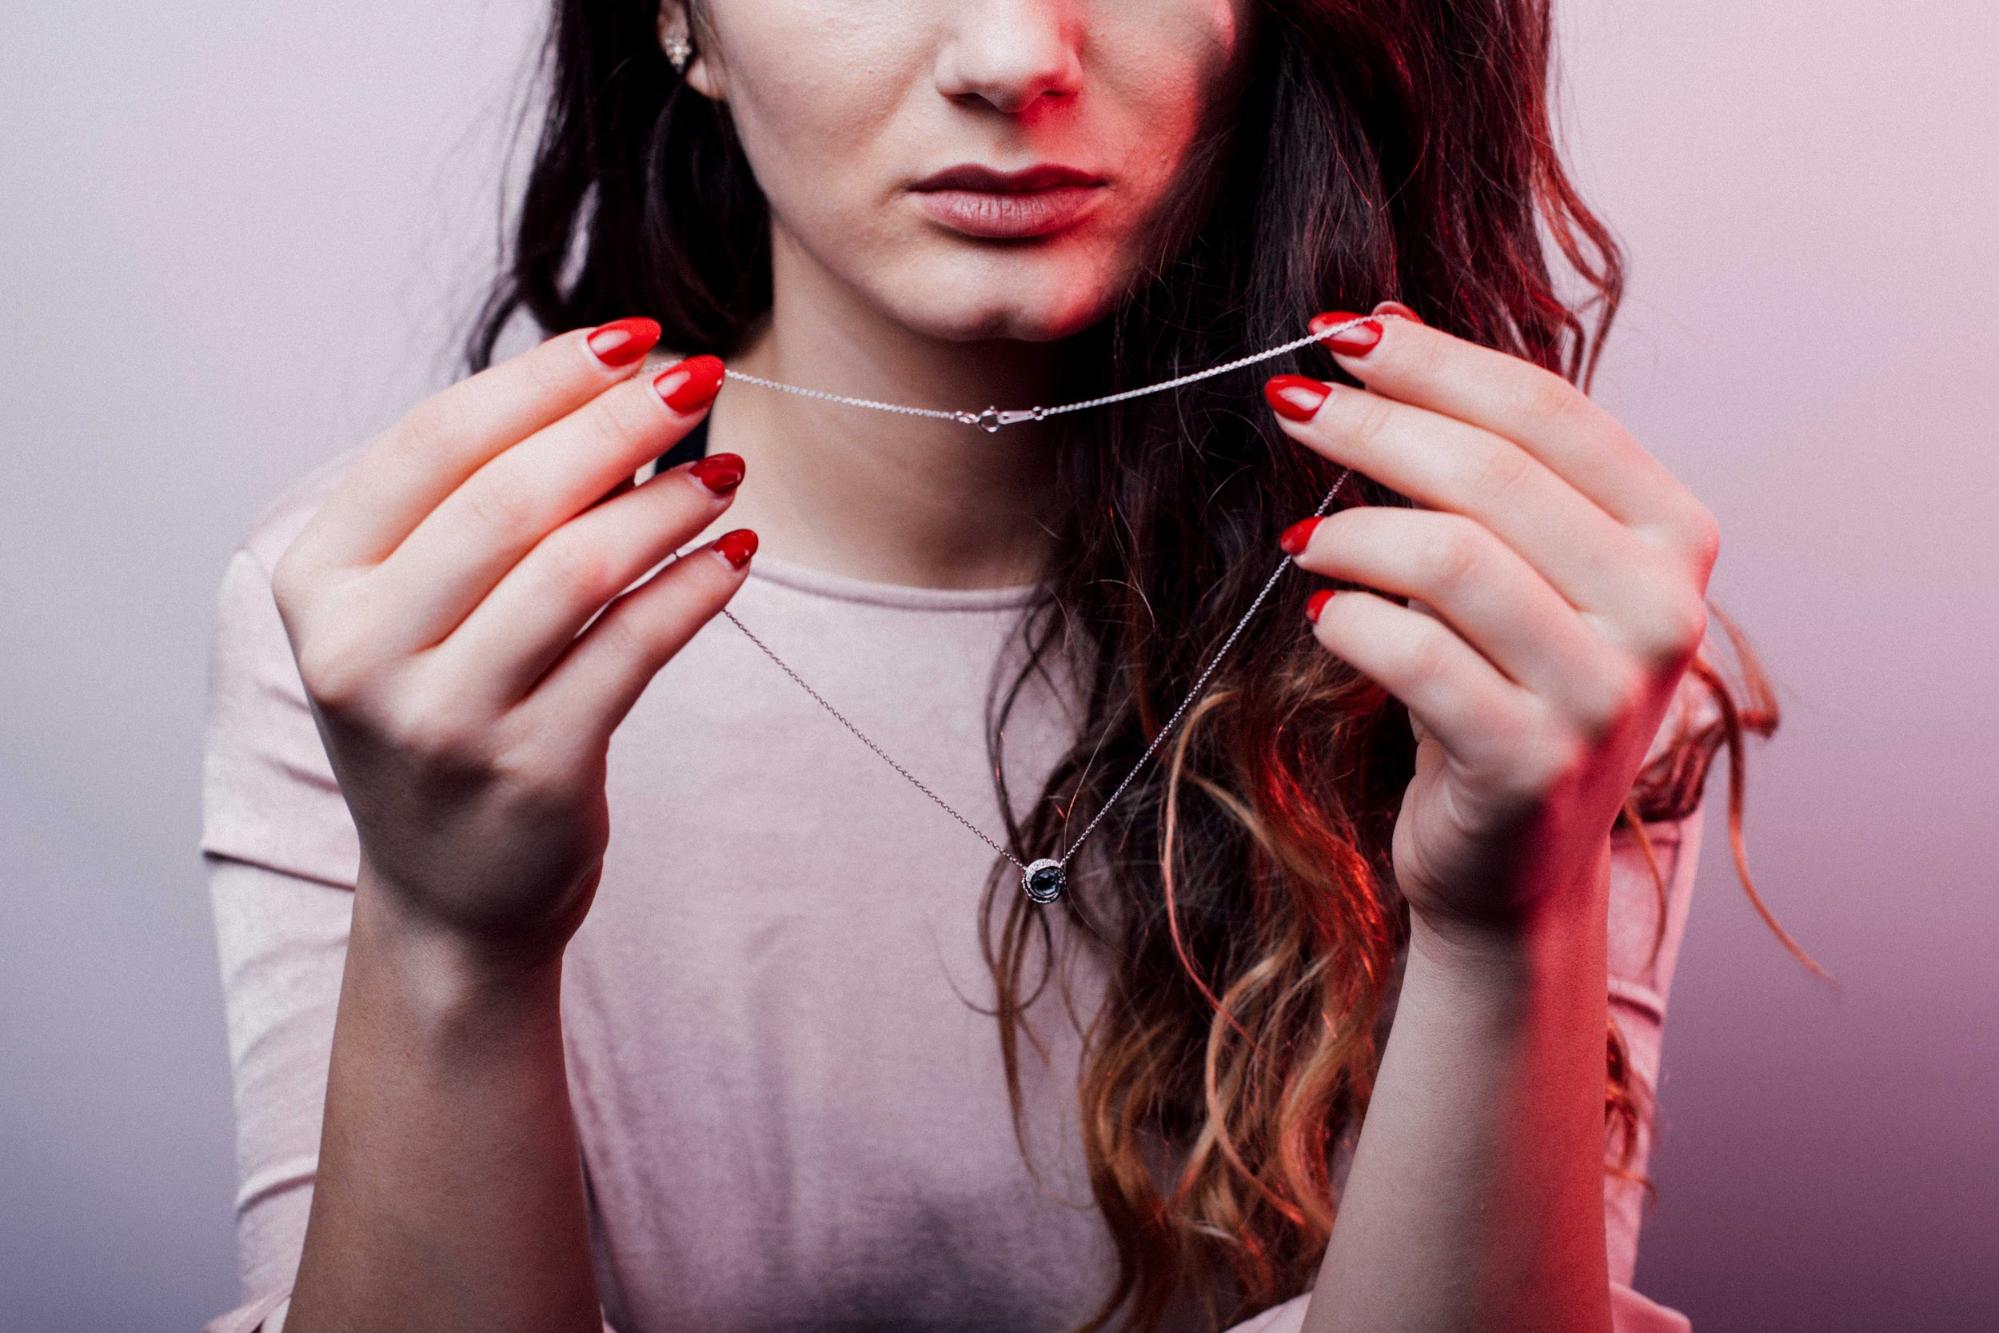 A model holds a necklace from Revival Jewelry while wearing a off-white top.